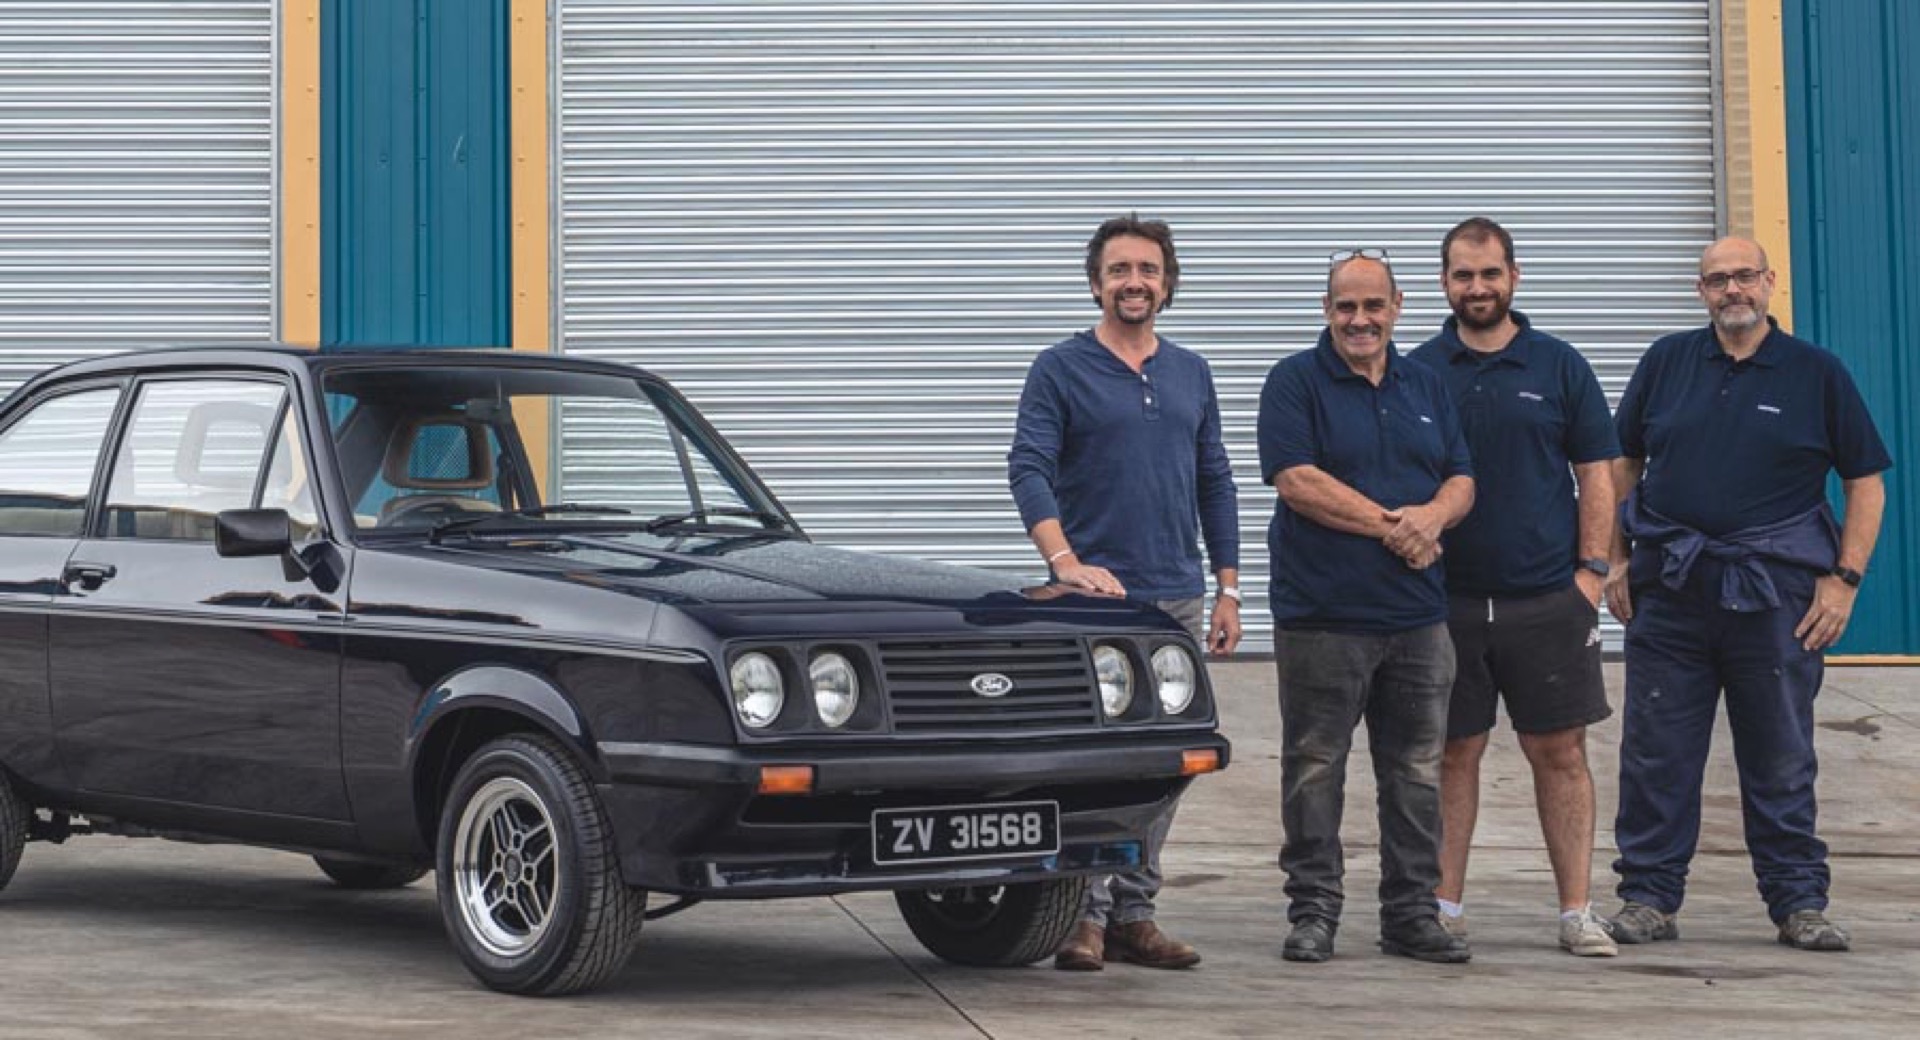 If You Fancy A Ford Escort Rs00 Mk2 You Re In Luck Richard Hammond Is Selling One Carscoops